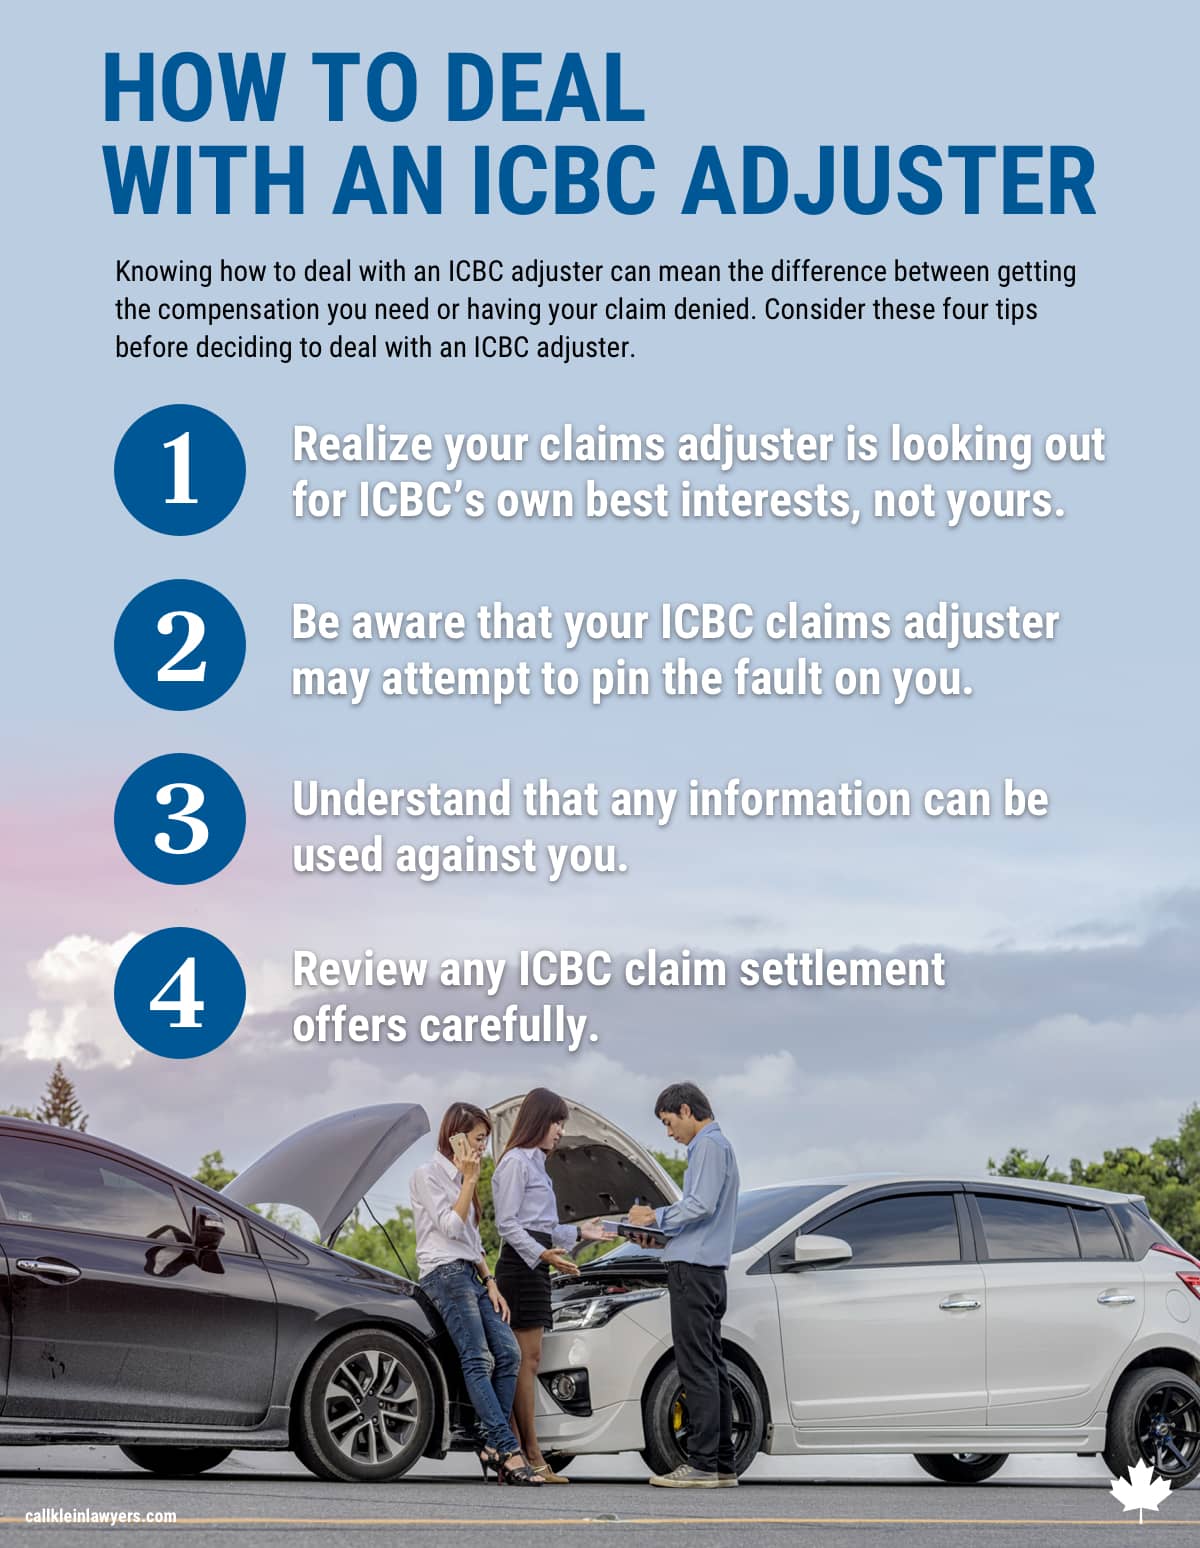 How to Deal with an ICBC Adjuster